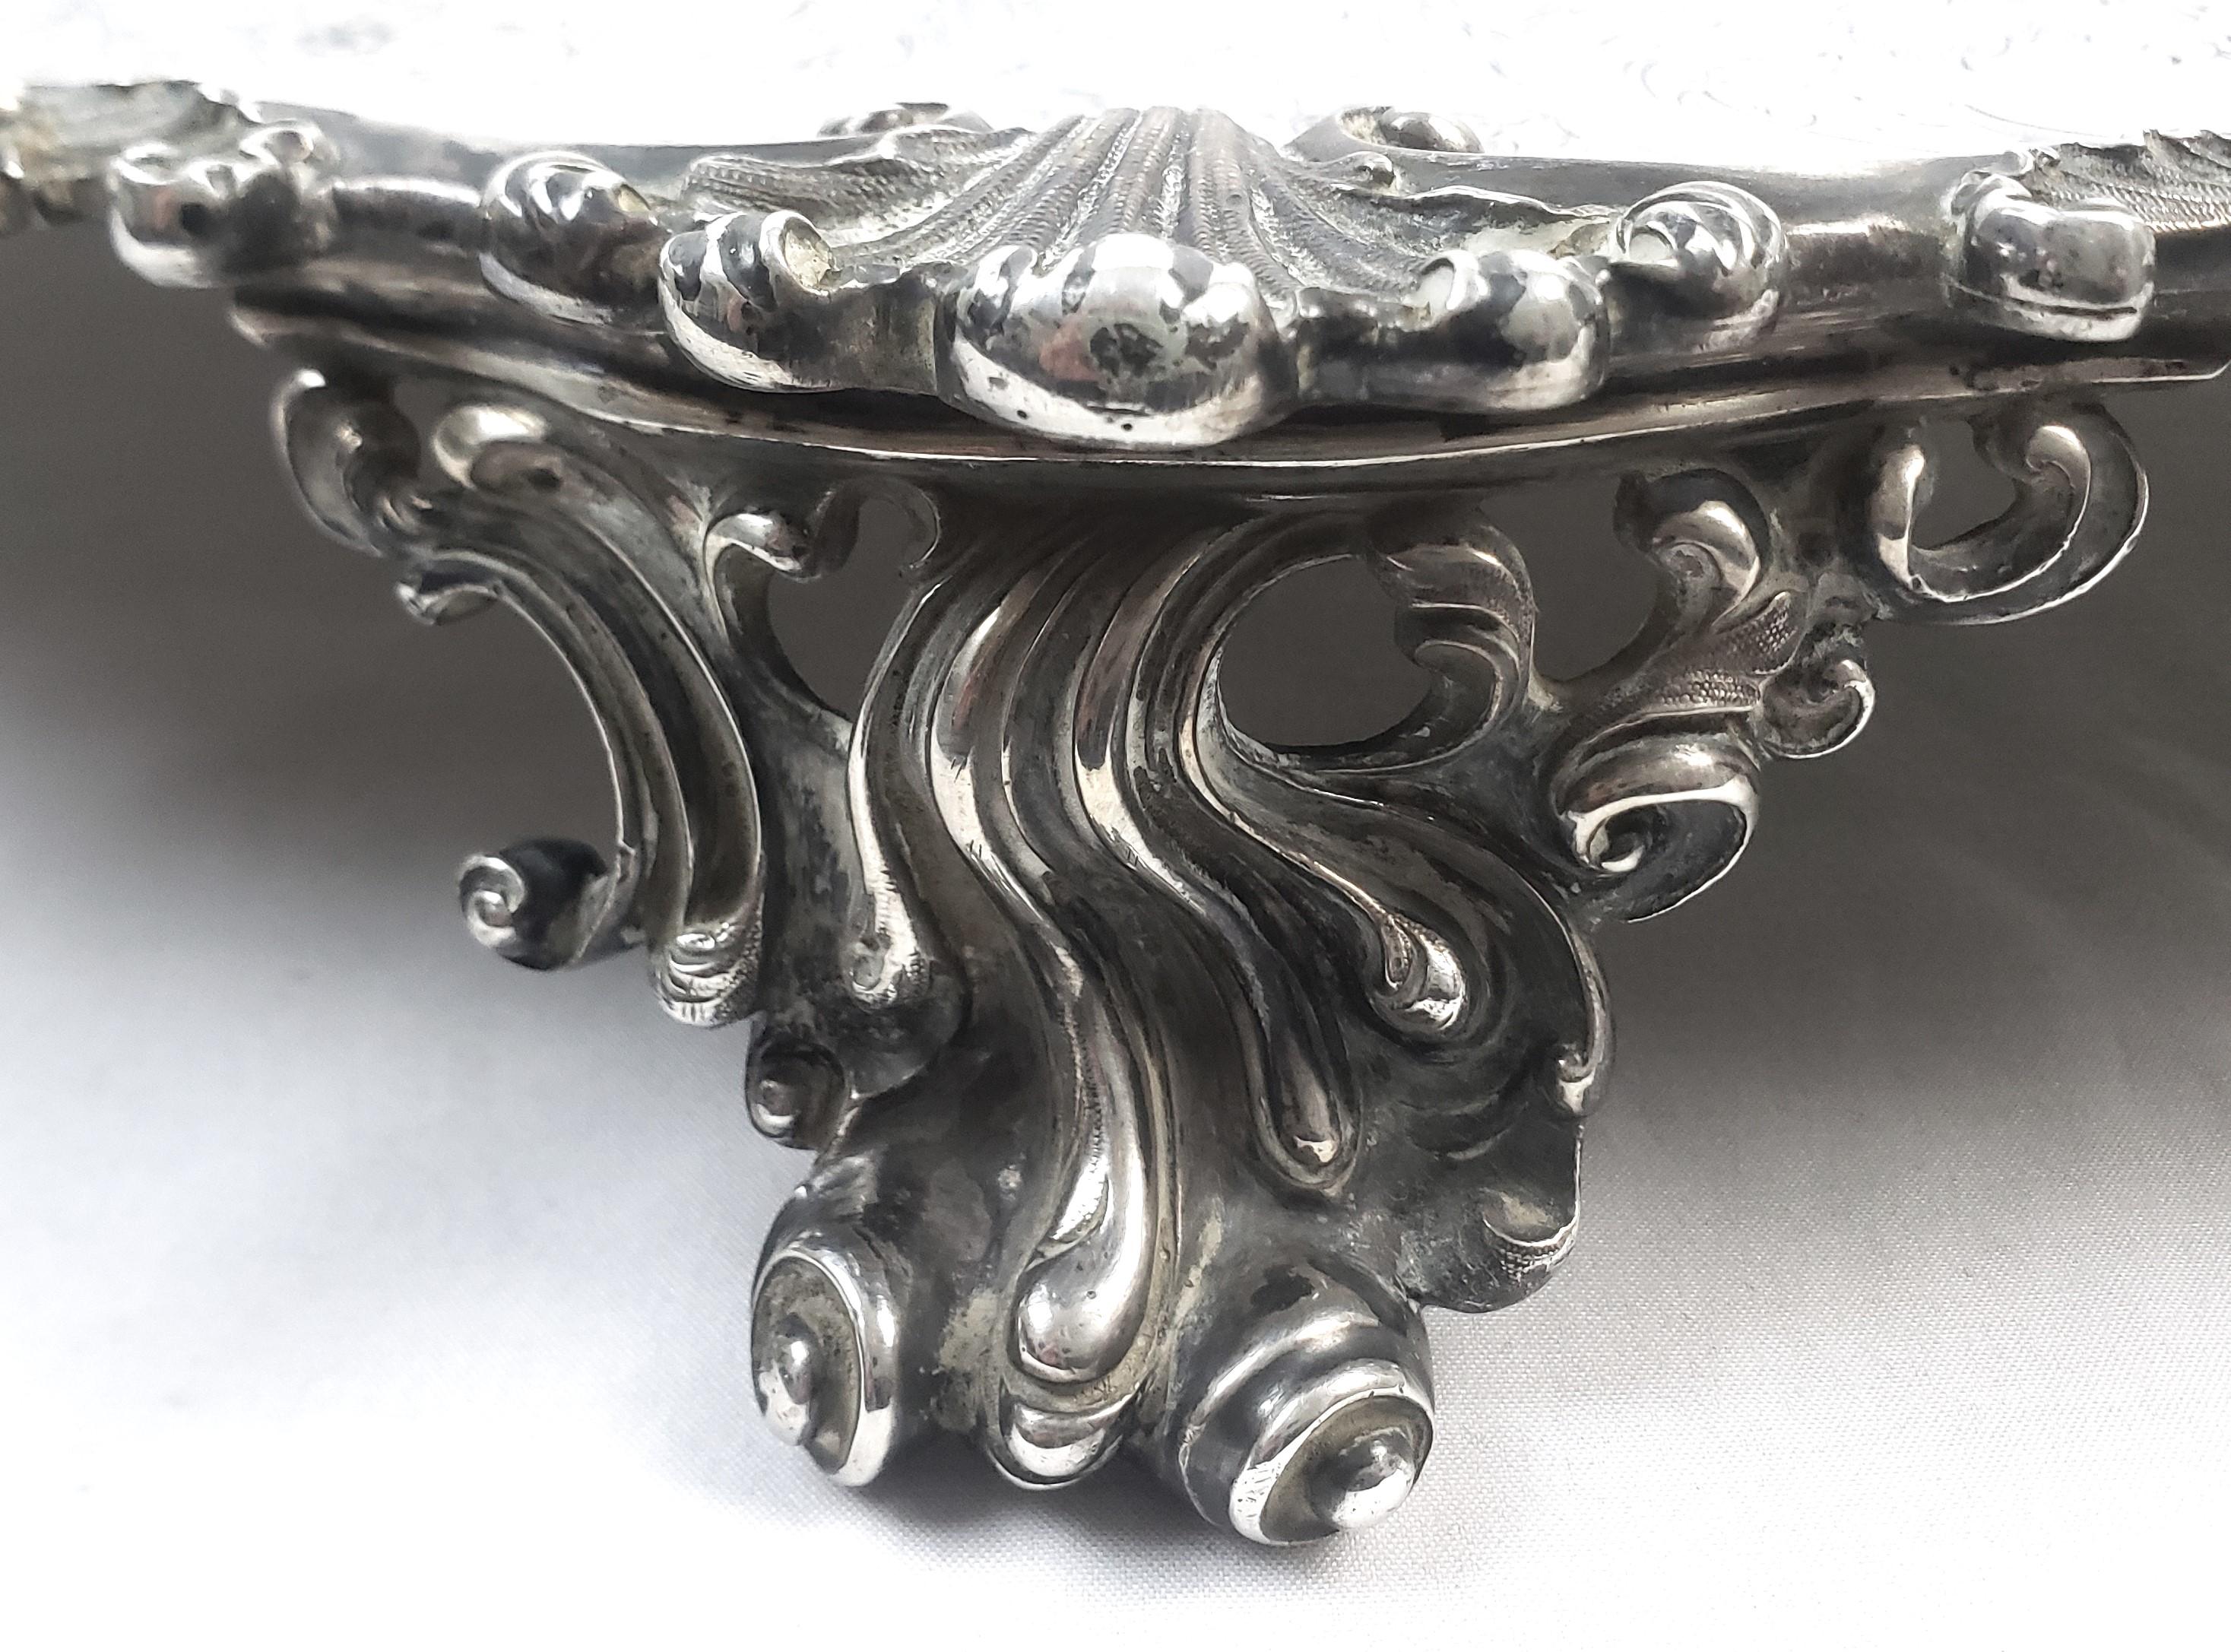 Huge Antique Sterling Silver Salver or Footed Tray with Ornate Floral Engraving For Sale 5